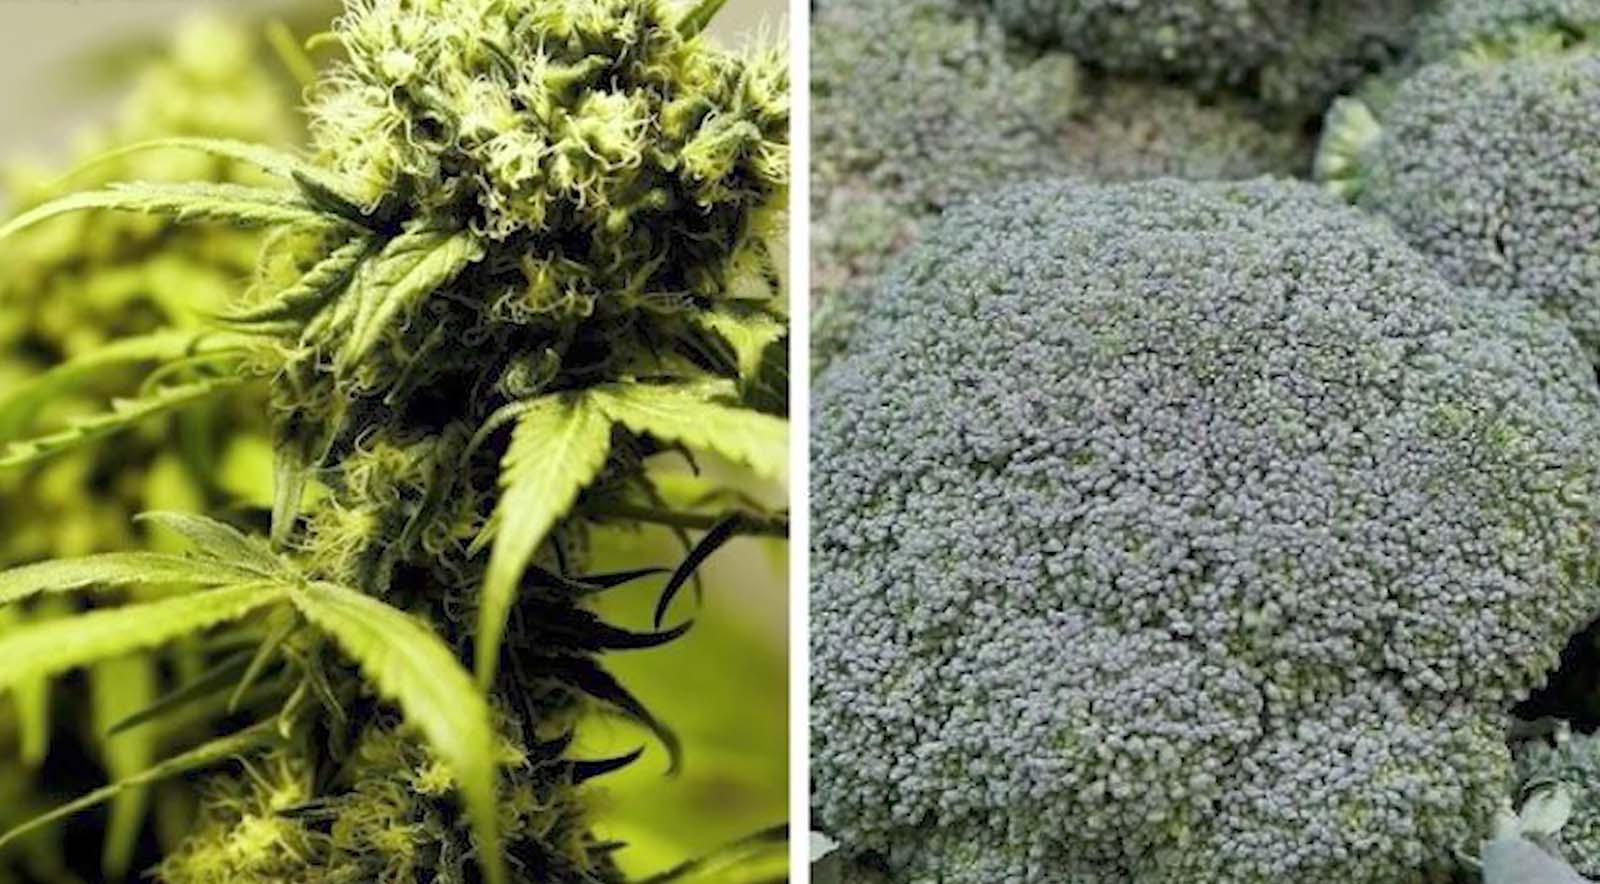 Smoke Your Greens: How Weed Dealers Duped Customers Into Buying Broccoli